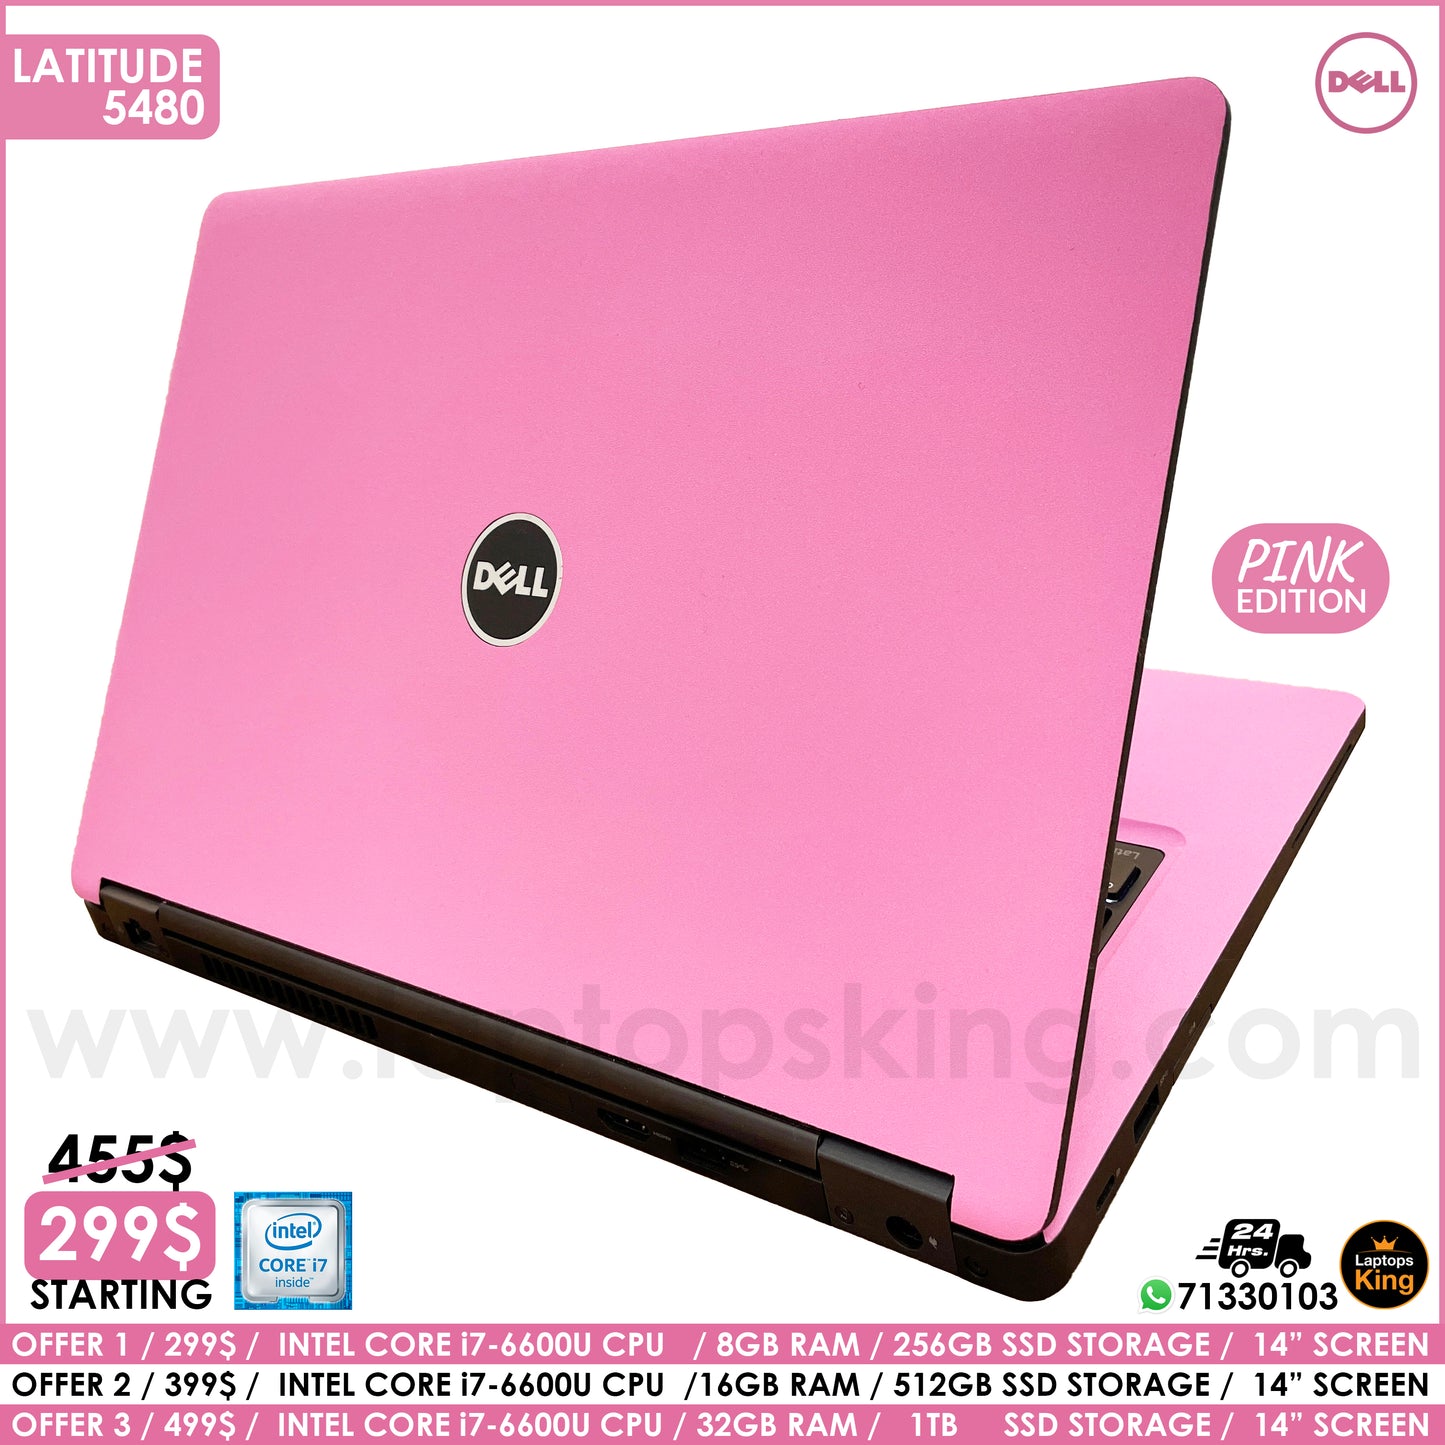 Dell Latitude 5480 Pink Edition Core i7 14" Laptop Offers (Open Box)